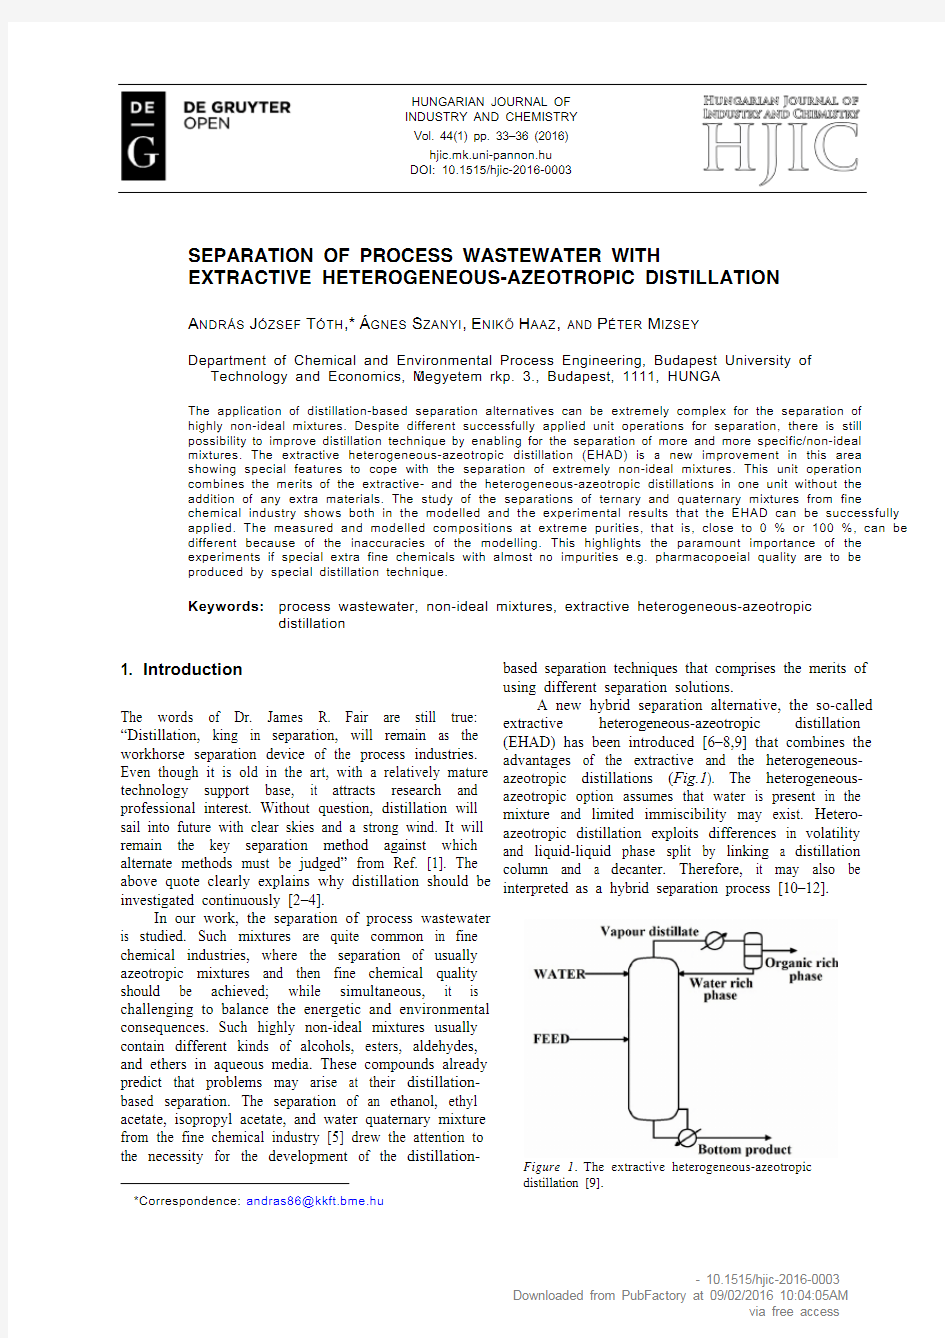 Separation of Process Wastewater with Extractive Heterogeneous-Azeotropic Distillation